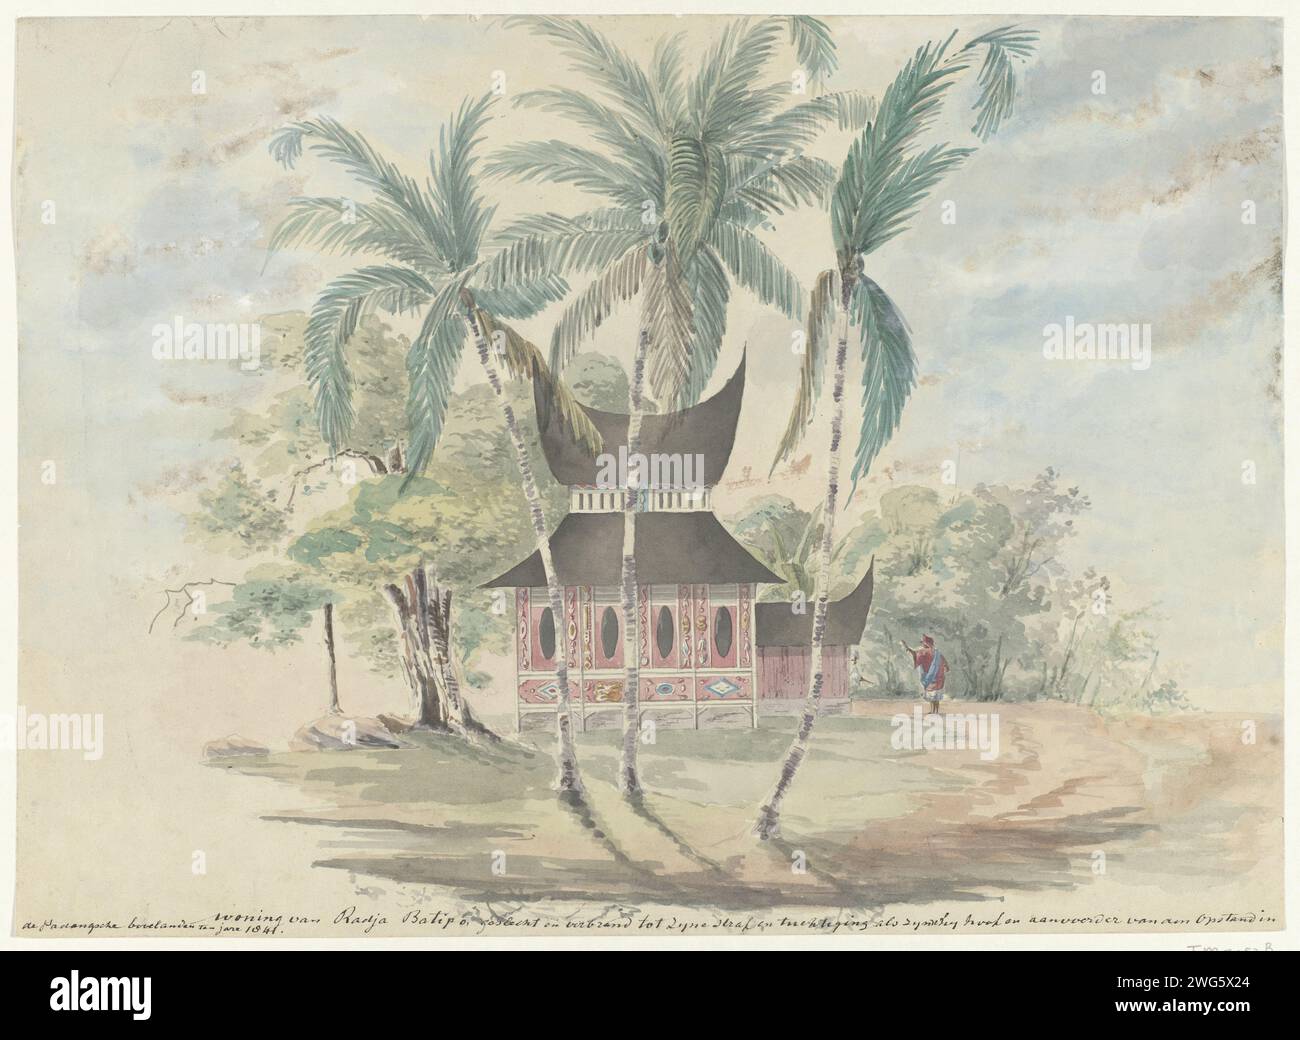 House of Radja Batipo, demolished and burned to his punishment and discipline as he being head and captain of the rebellion in the Padangsche Bovelandententen Jare 1841, 1841  The house located between trees, in the foreground three palm trees, two people on the right at the house. According to the caption, this would be the home of the Sultan of Batipo (Batipuh). In 1841, this Sultan led a rebellion against Dutch authority in the Padang Panjang district on the west coast of Sumatra. Netherlands paper. watercolor (paint) brush writer, poet, author. Helicon, sacred to the Muses Sumatra. Fake Pa Stock Photo